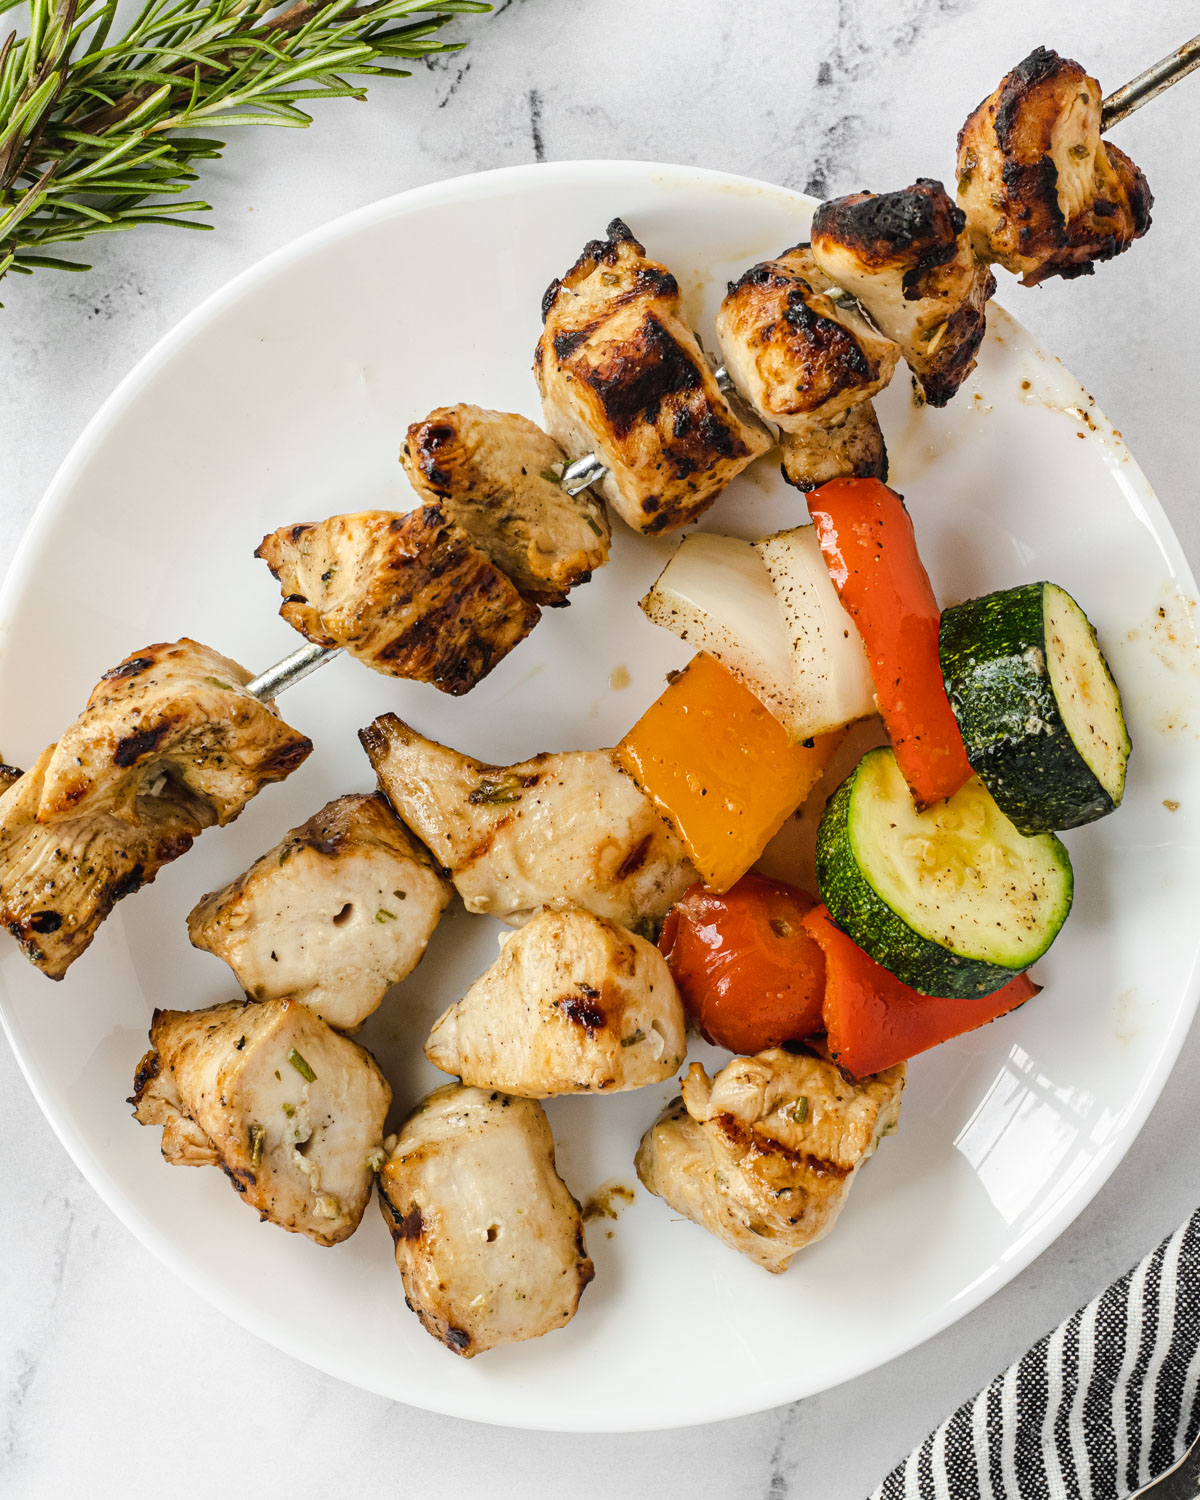 A skewer of rosemary ranch chicken on a white plate, with some pieces of chicken and grilled vegetables on the plate.